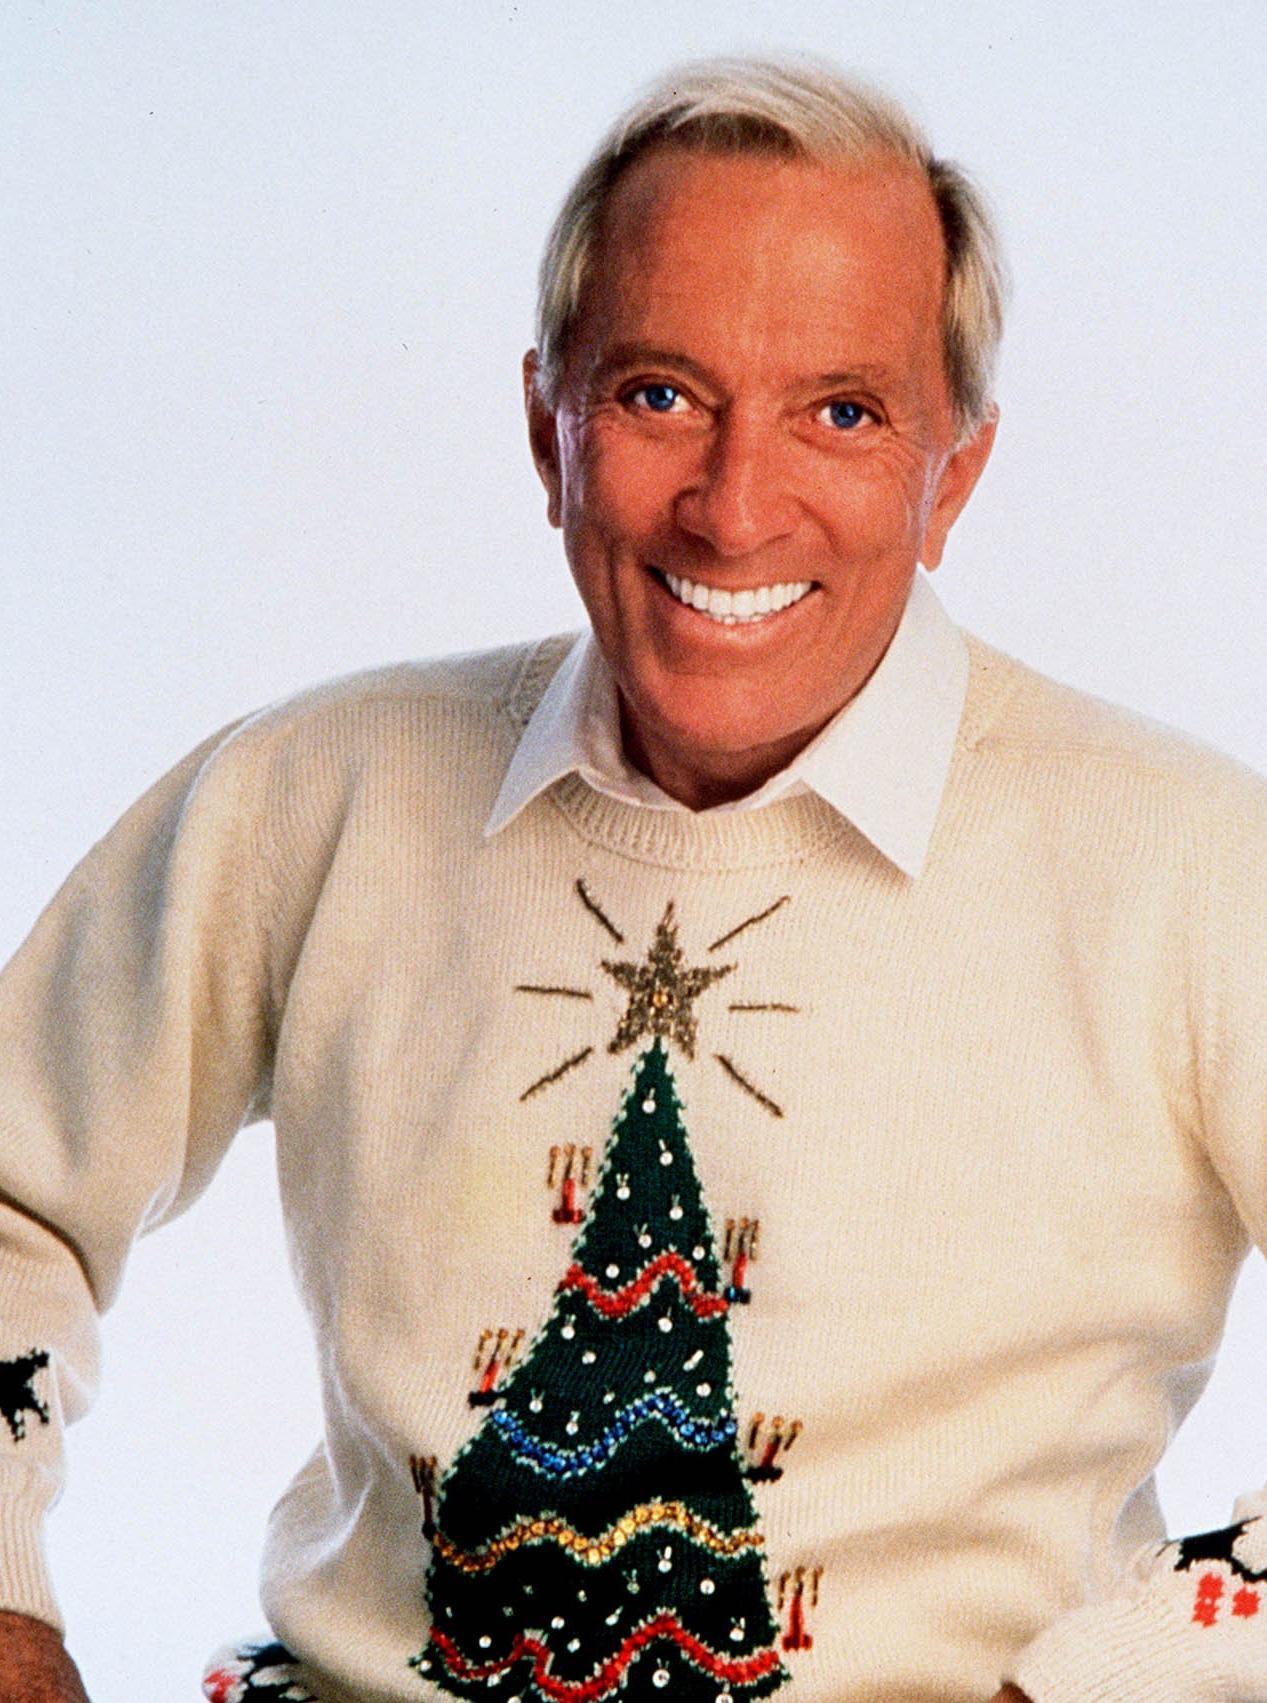 Andy Williams on the TV and reindeer for memory are Christmas memories